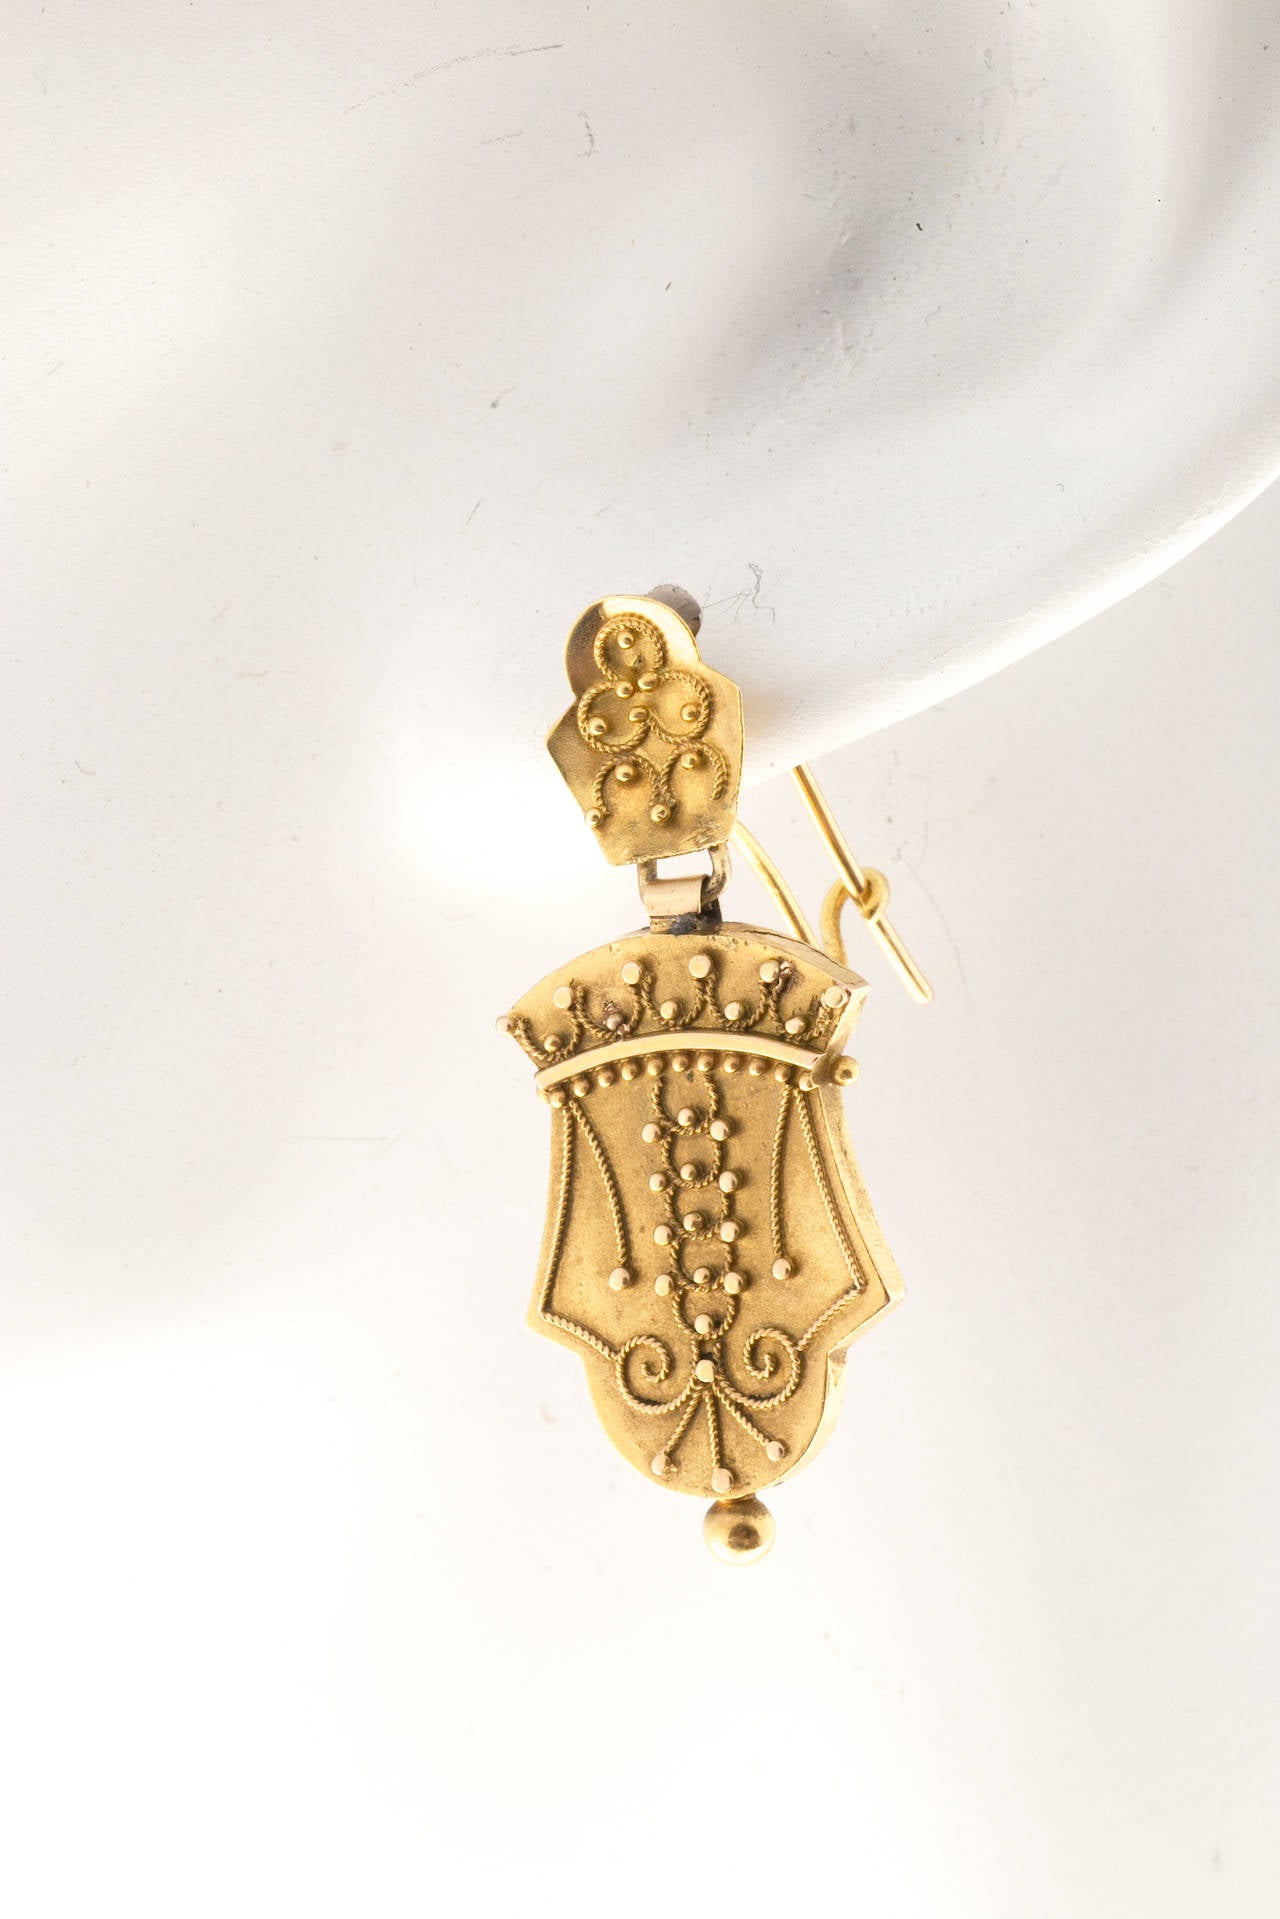 Mid Victorian Original handmade 14k yellow gold Dangle Earrings. circa 1860's

14k Yellow Gold
4.0 grams
Top to bottom: 1.42 inch or 36.26mm
Width: 15.36mm or .60 inch
Depth: 2.4mm